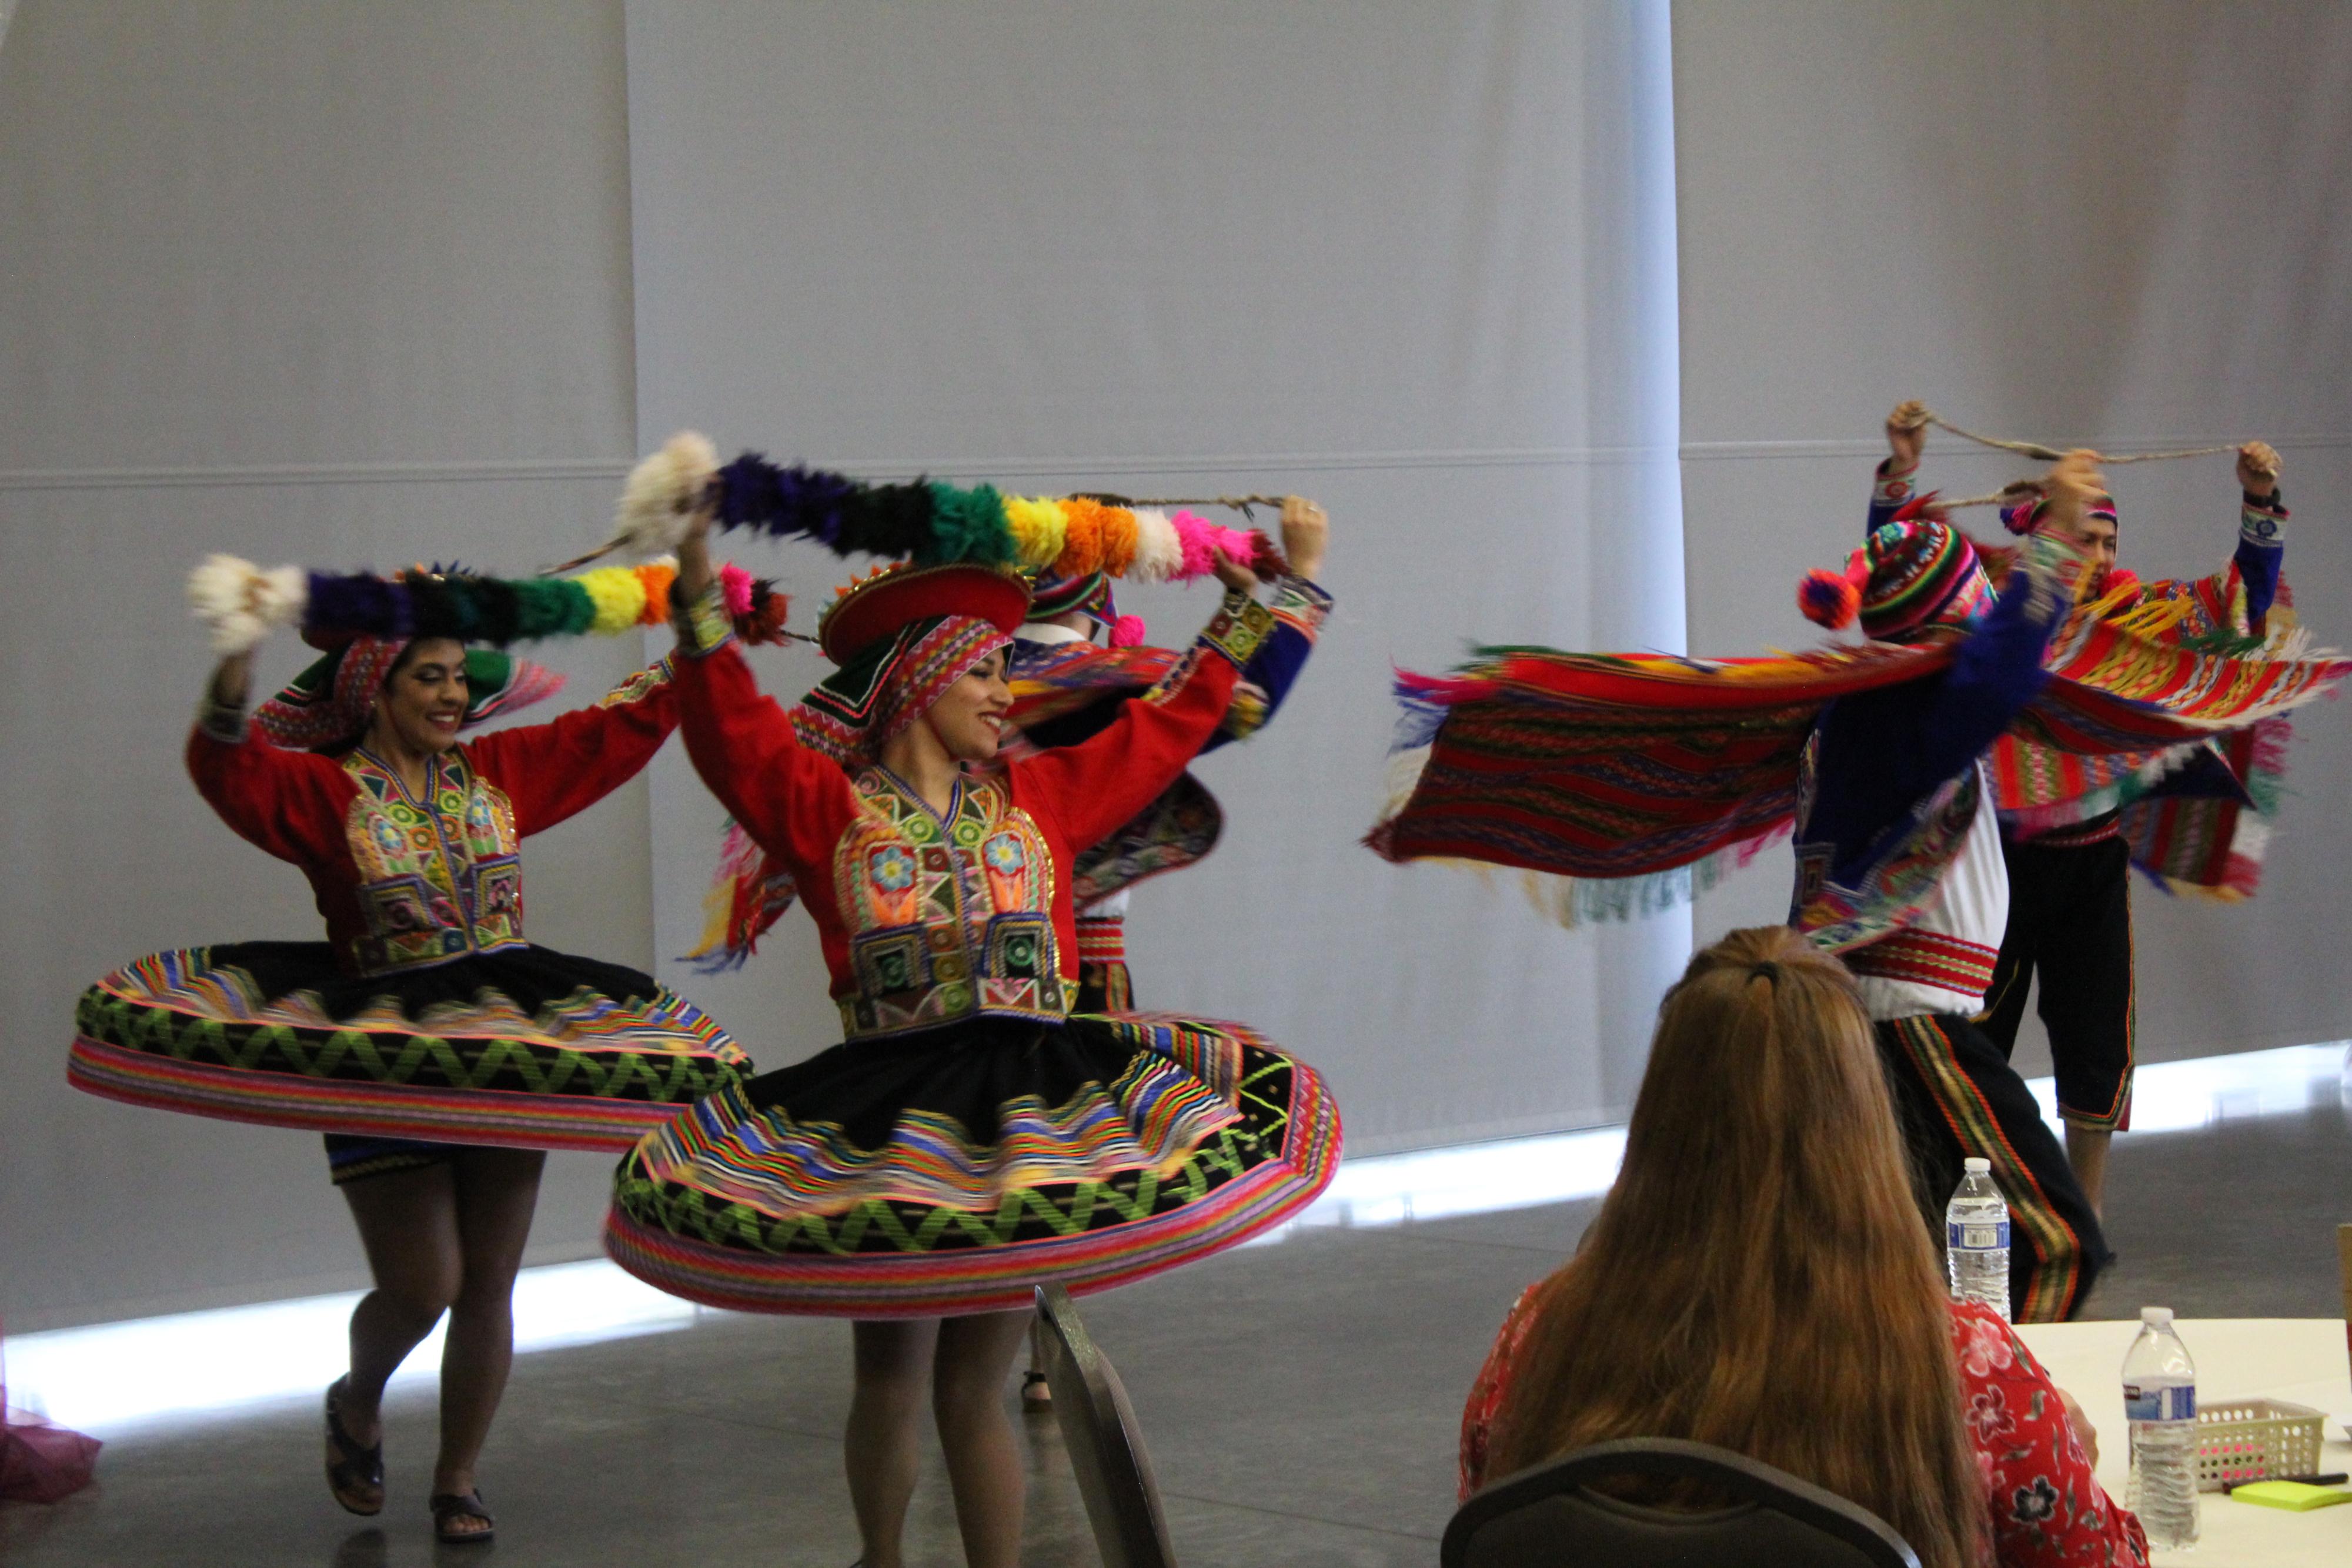 A Latin American cultural group performs